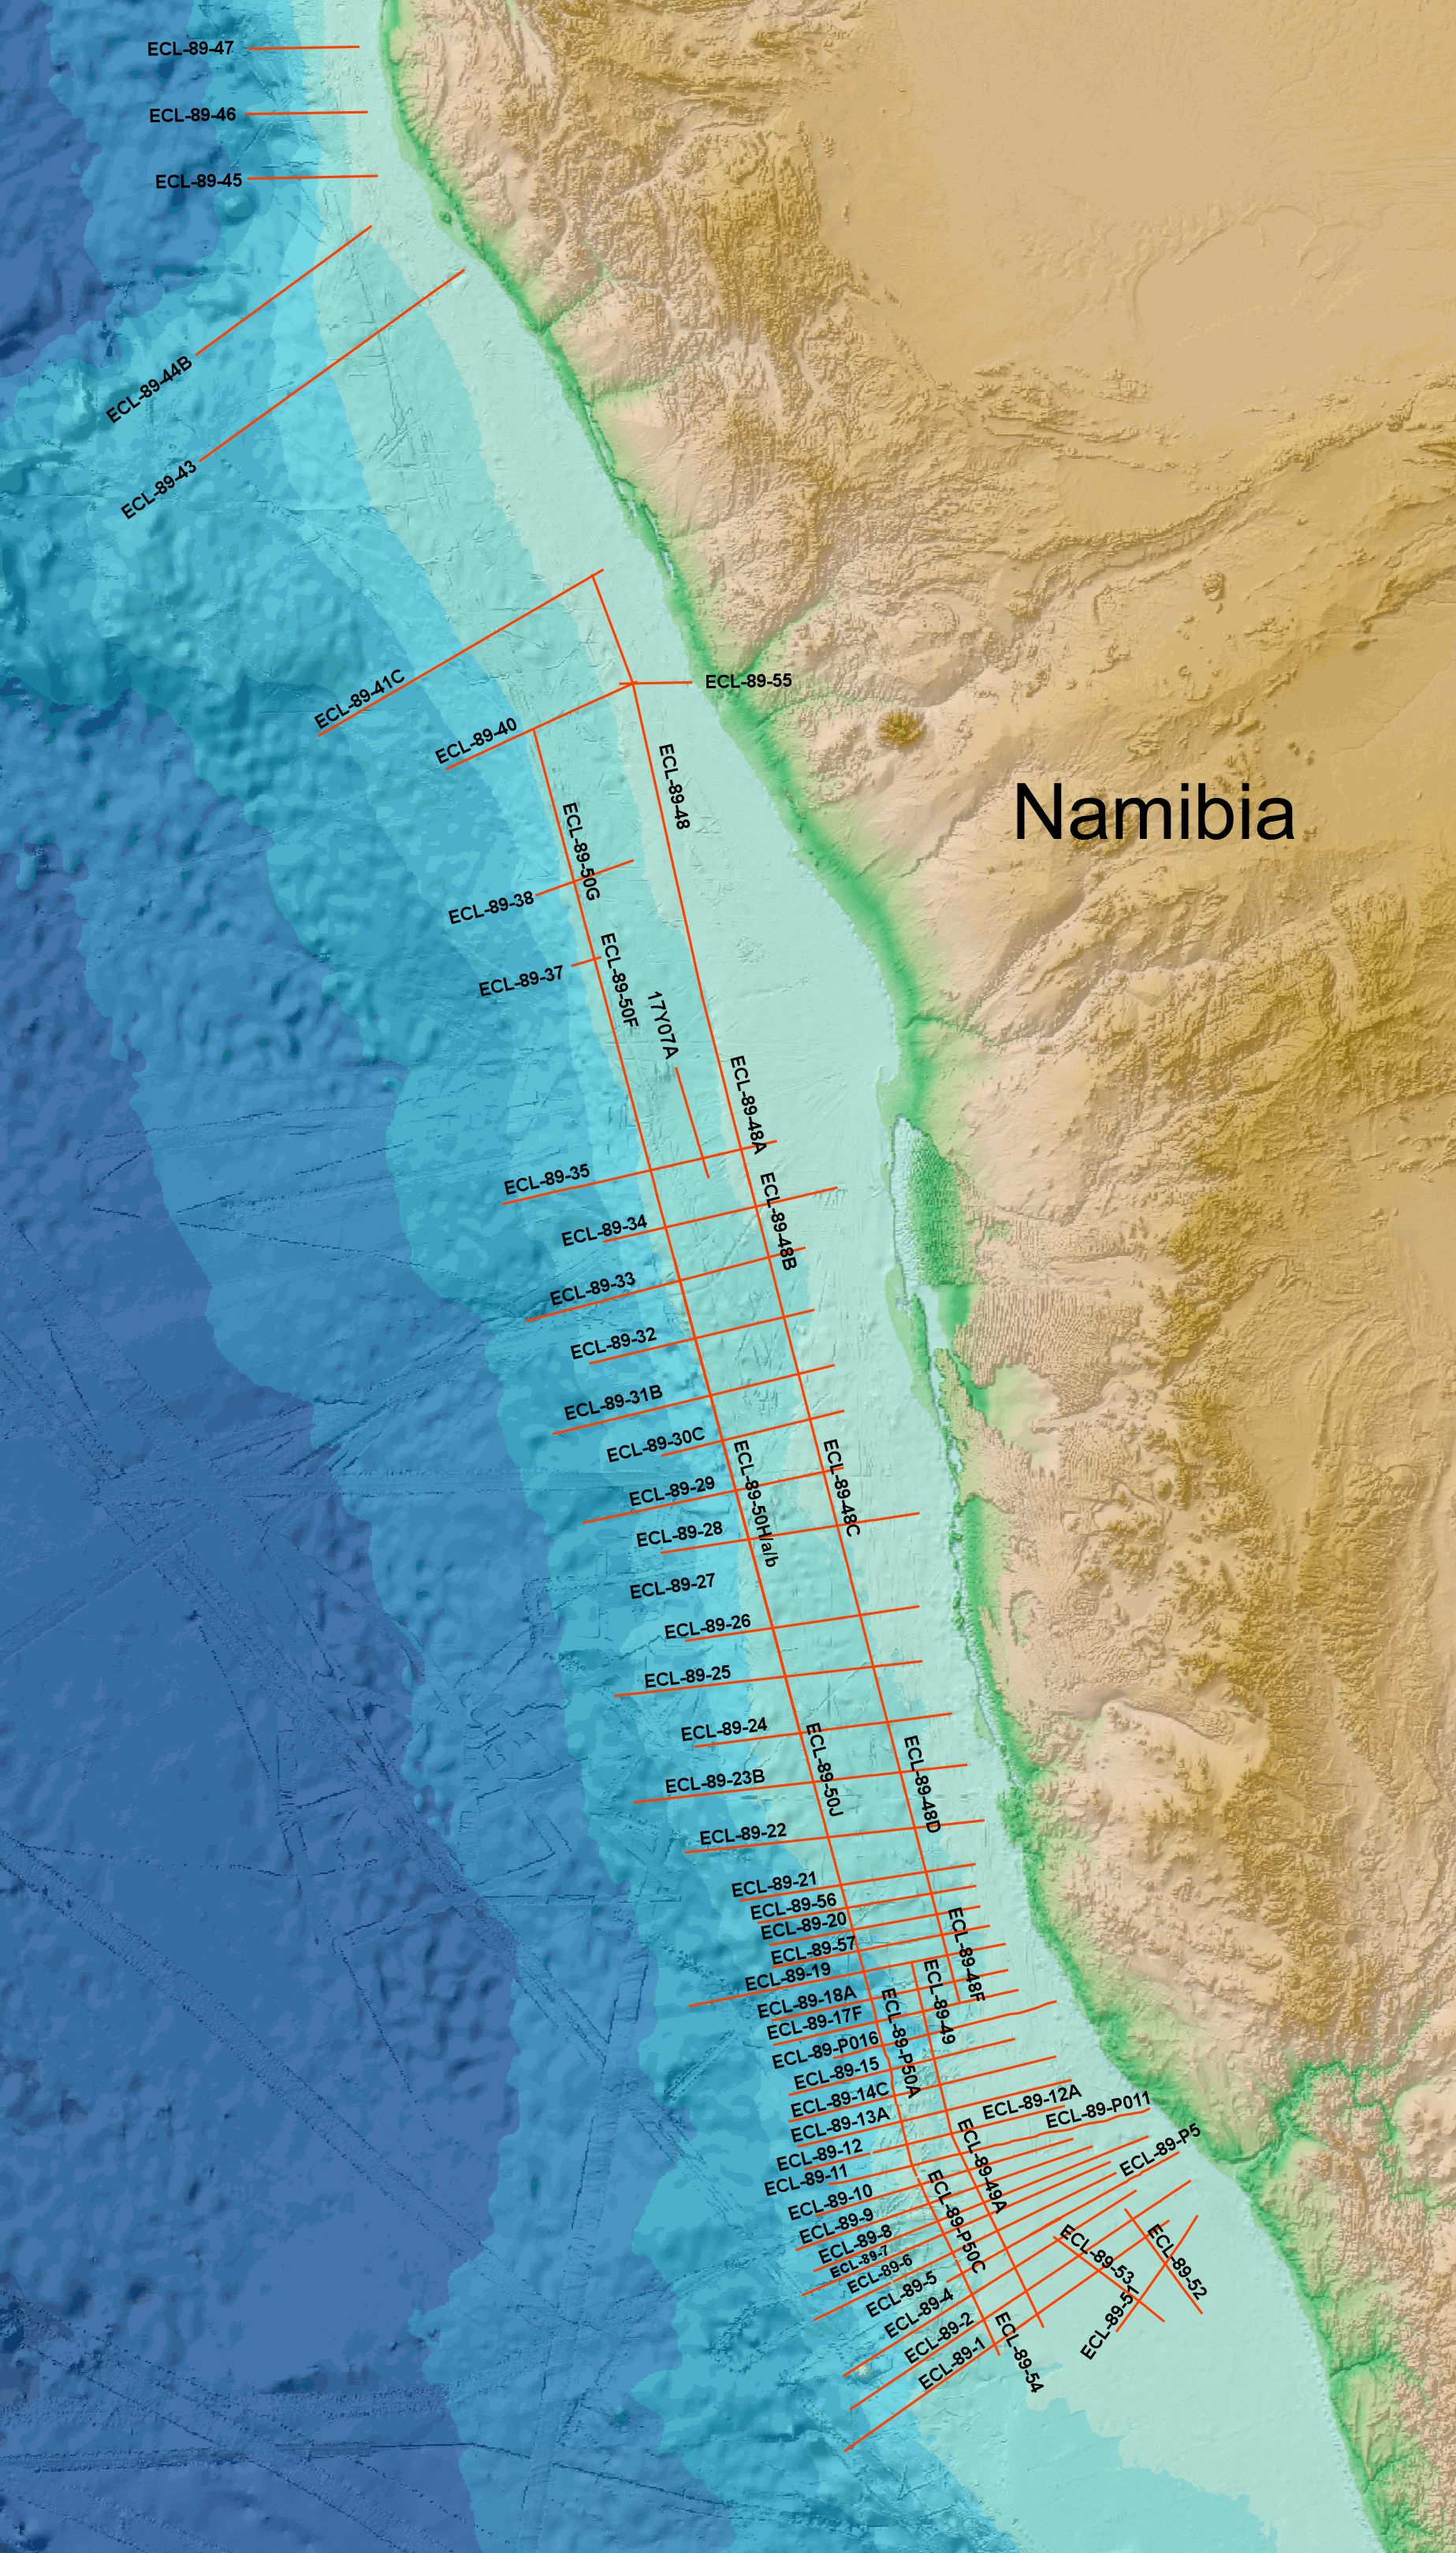 Namibia Offshore seismic project